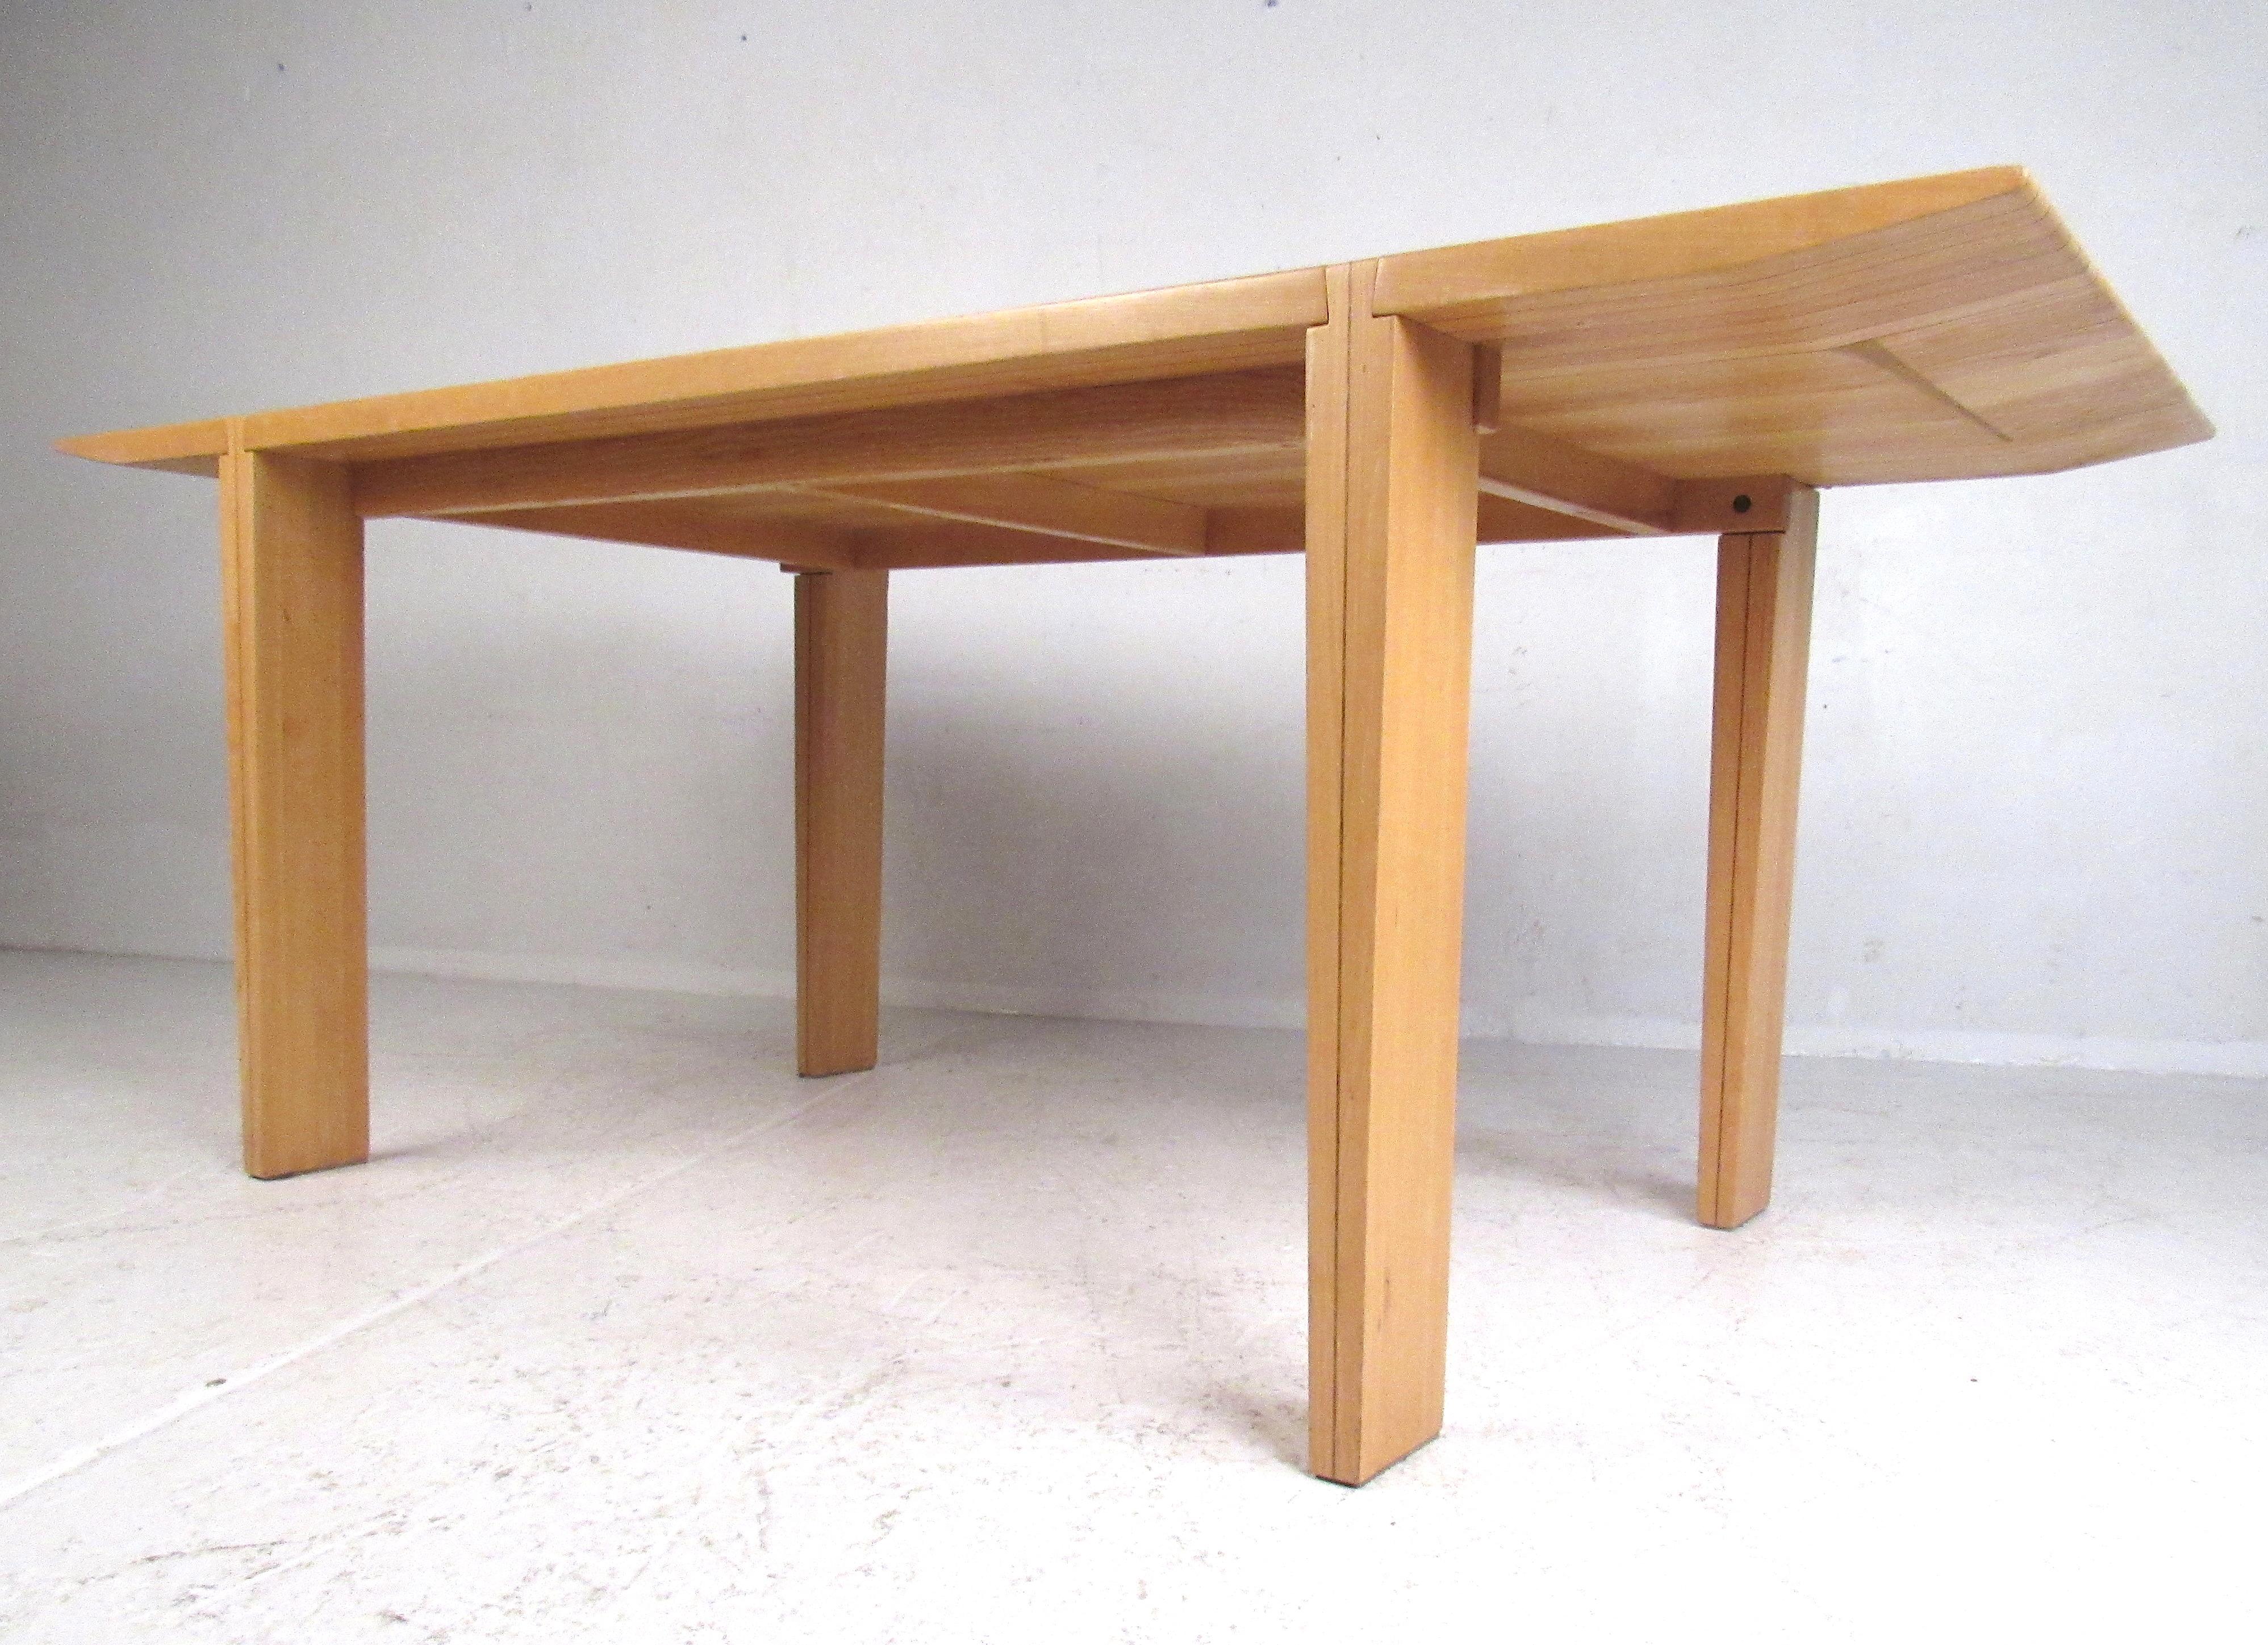 Impressive dining table by Antonio Sibau. Interesting design with unusual dovetailed lap joinery connecting the legs to the tabletop. Great addition to any modern interior. Please confirm item location with dealer (NJ or NY).